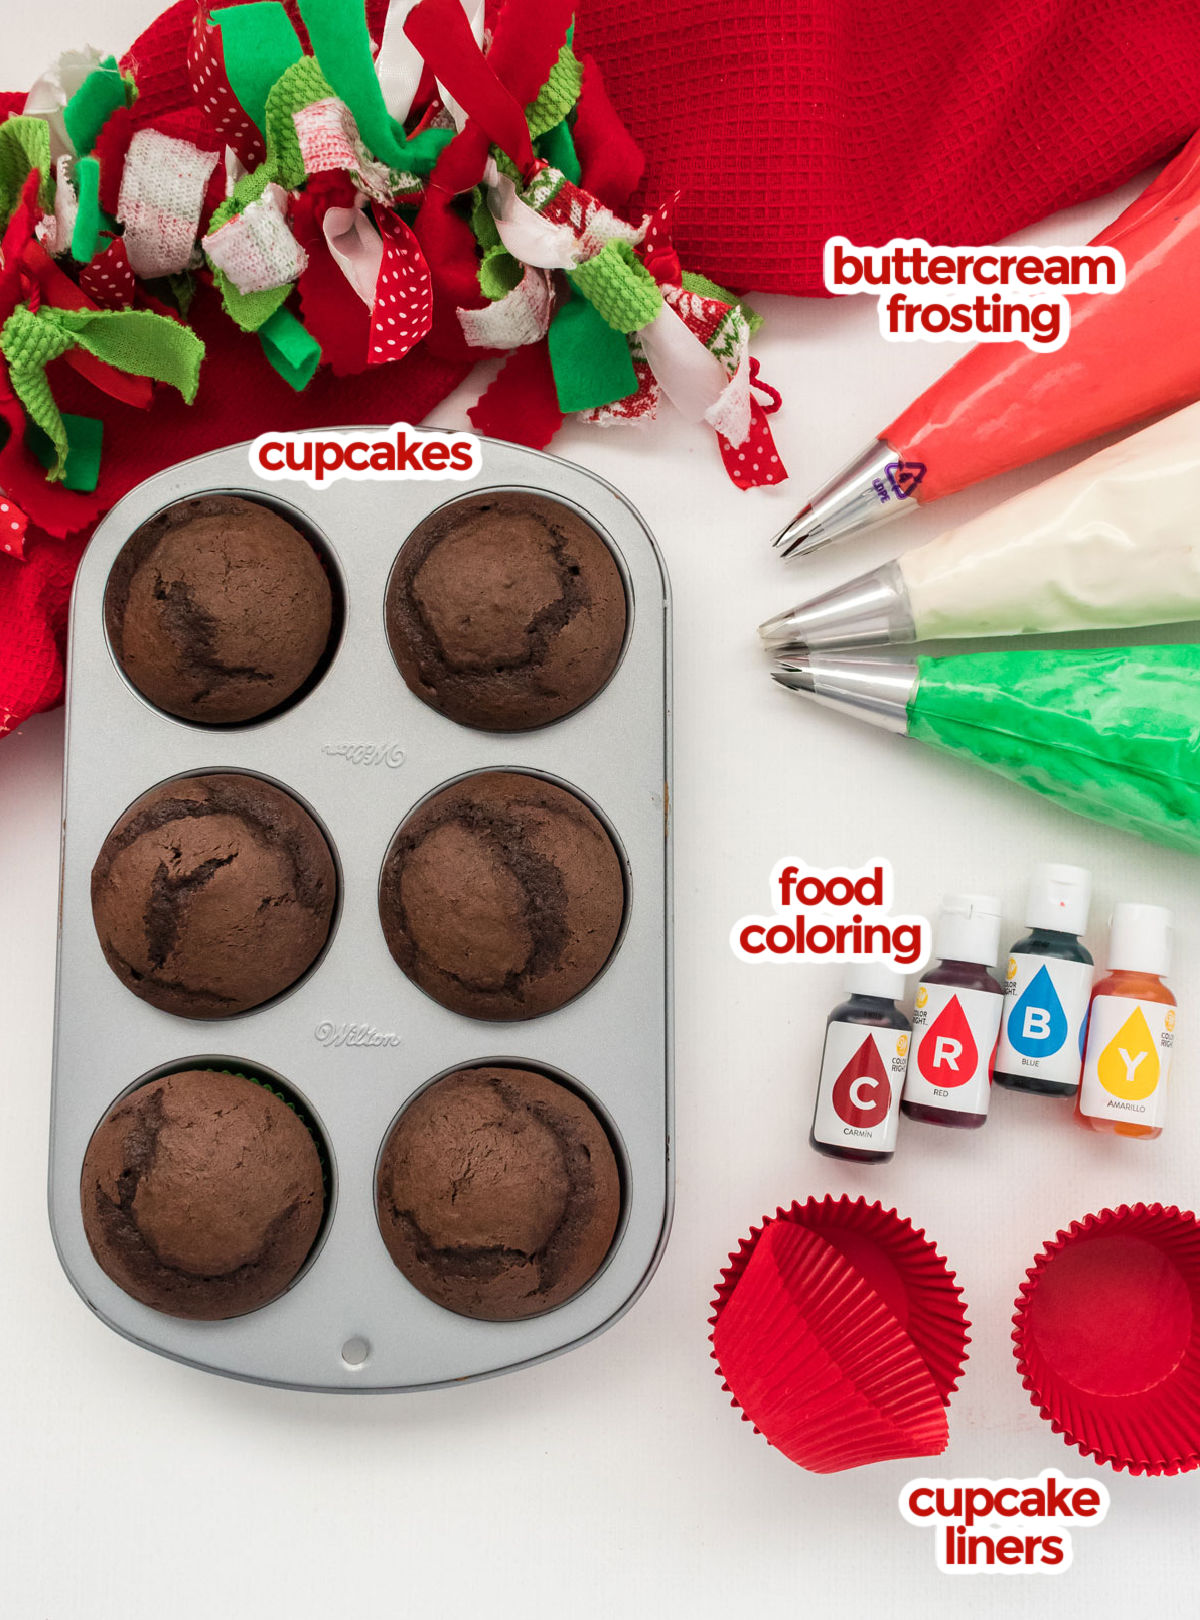 All the ingredients you will need to make Easy Christmas Cupcakes including cupcakes, buttercream frosting, food coloring and red cupcake liners.